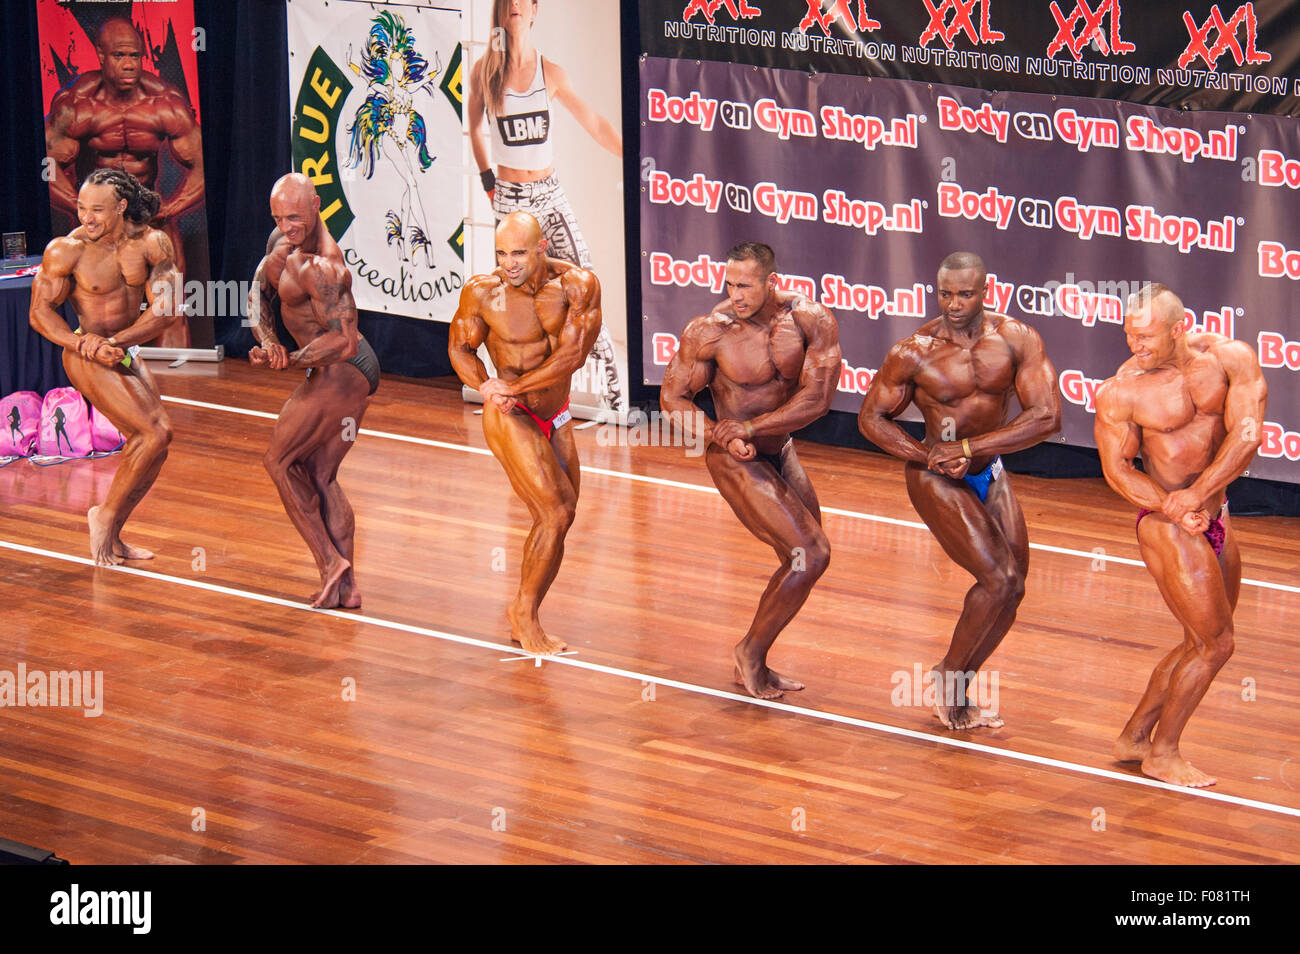 SCHIEDAM, THE NETHERLANDS - APRIL 26, 2015. Male bodybuilders showing their best chest pose on stage in a lineup comparison Stock Photo